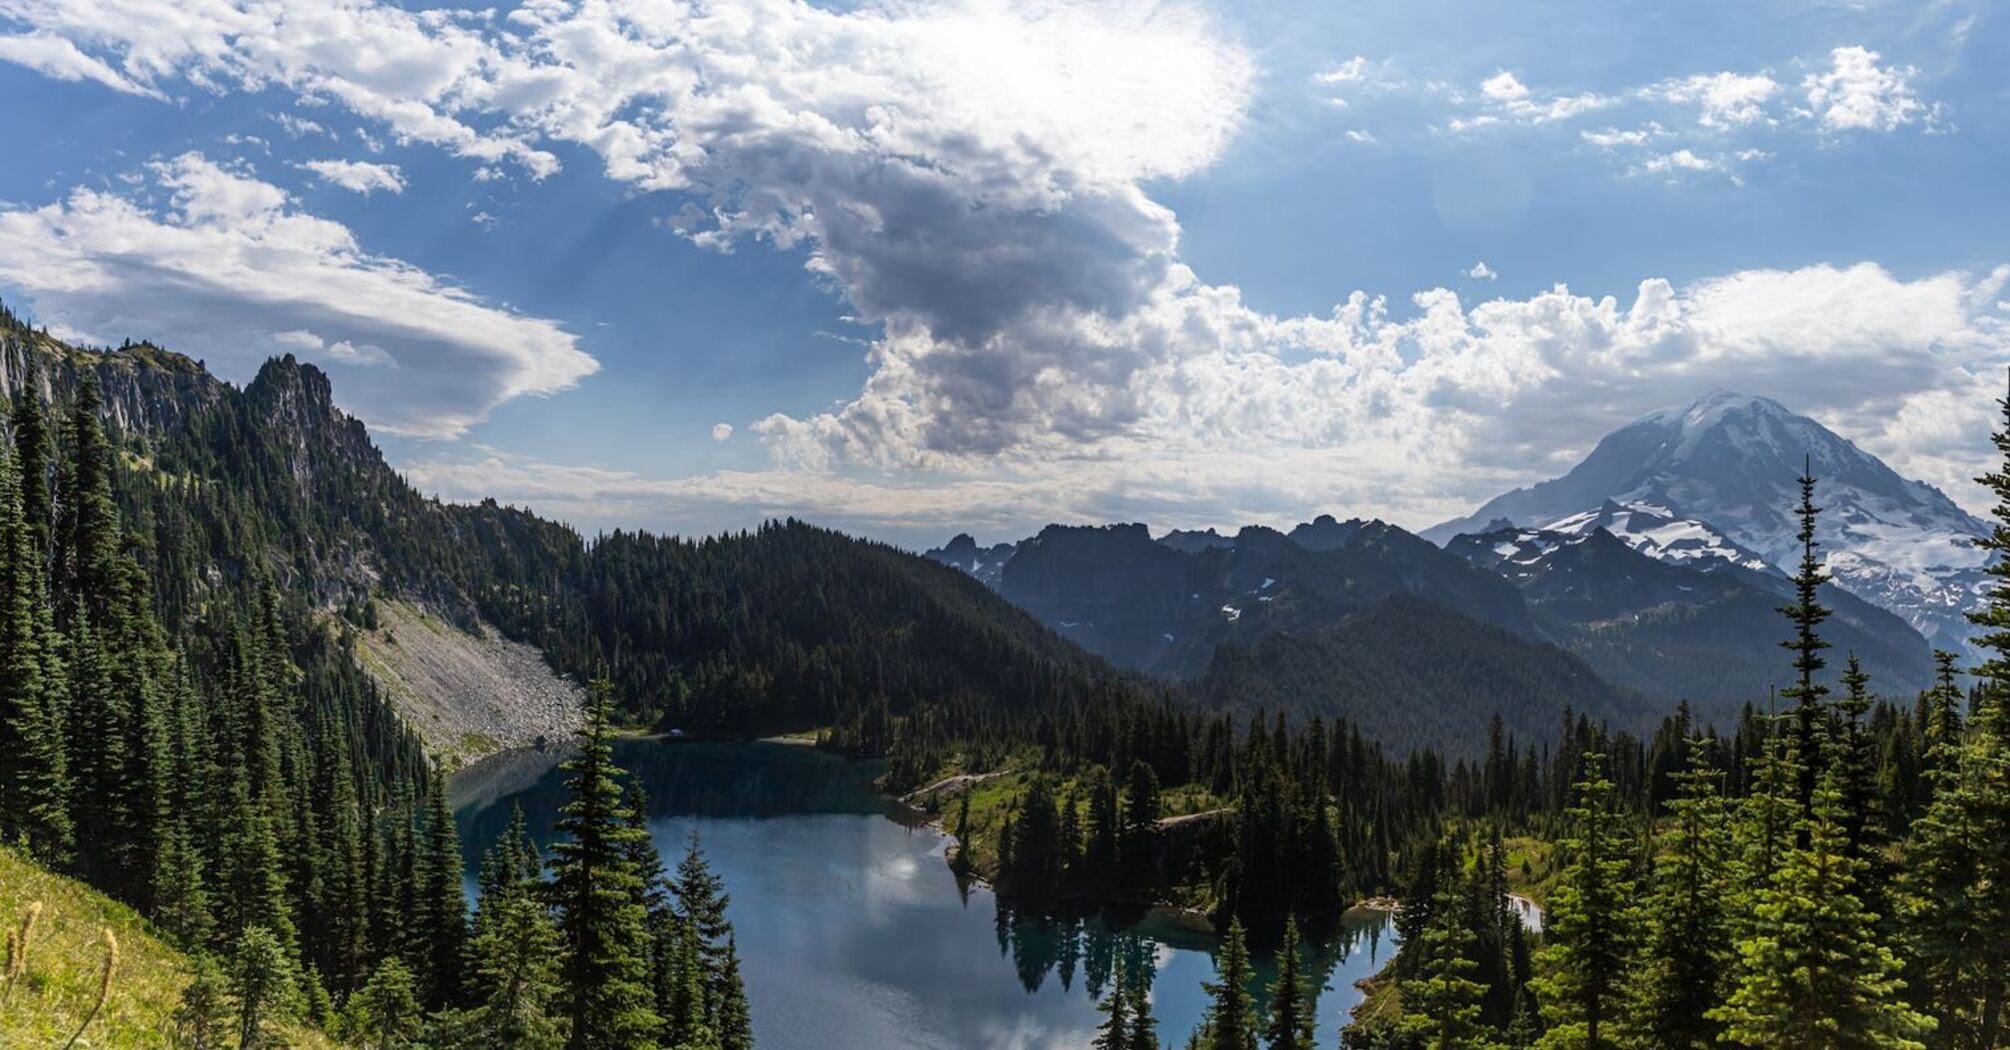 A panoramic view of a mountain with a lake, forests, and clouds